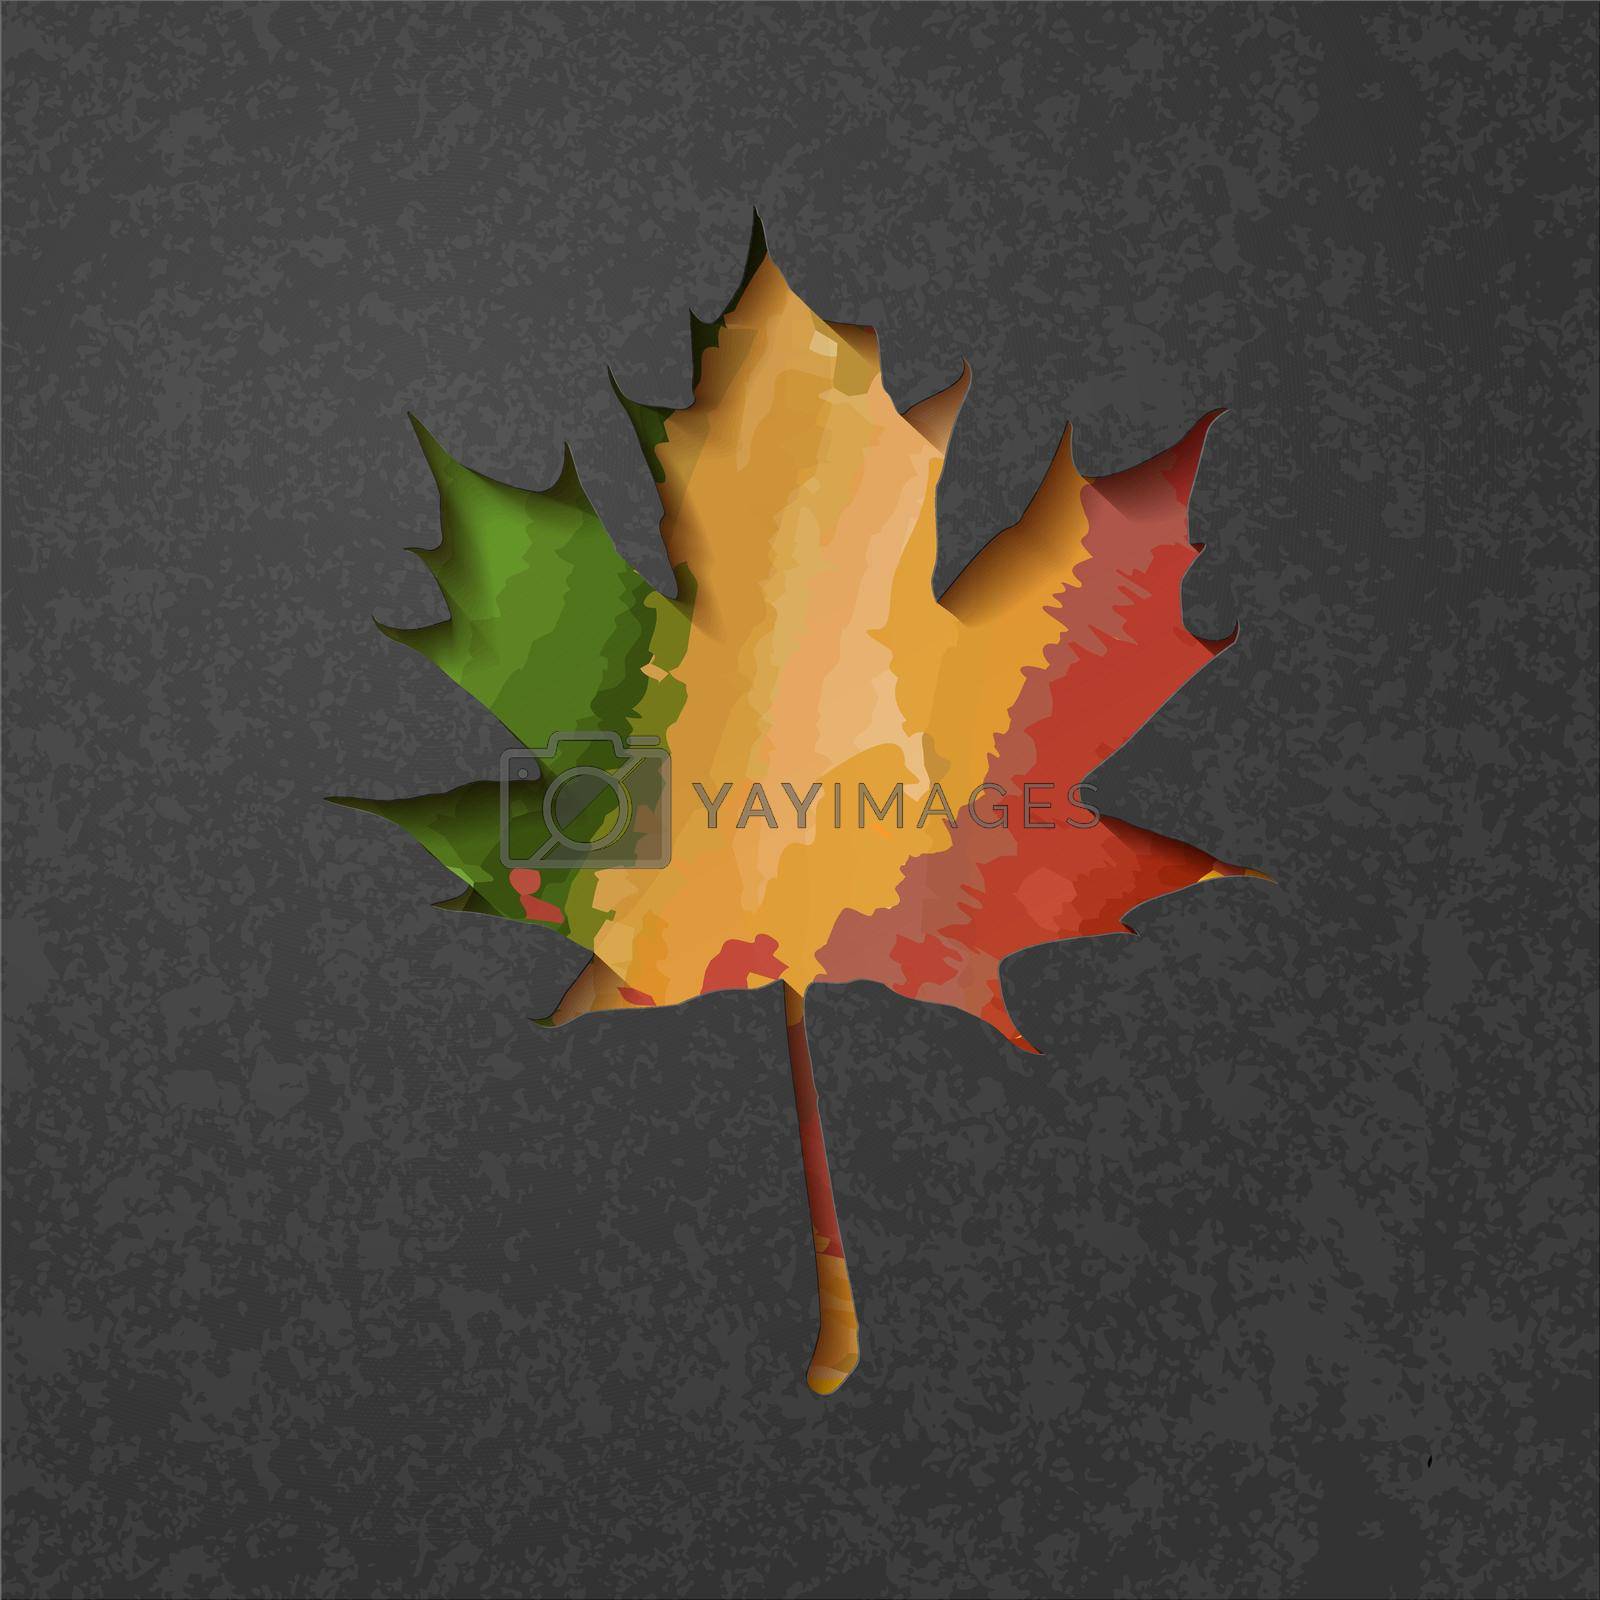 Royalty free image of Maple leaf vector shape icon. Forest and wood symbol sign. Nature tree logo. by Pakaliuyeva